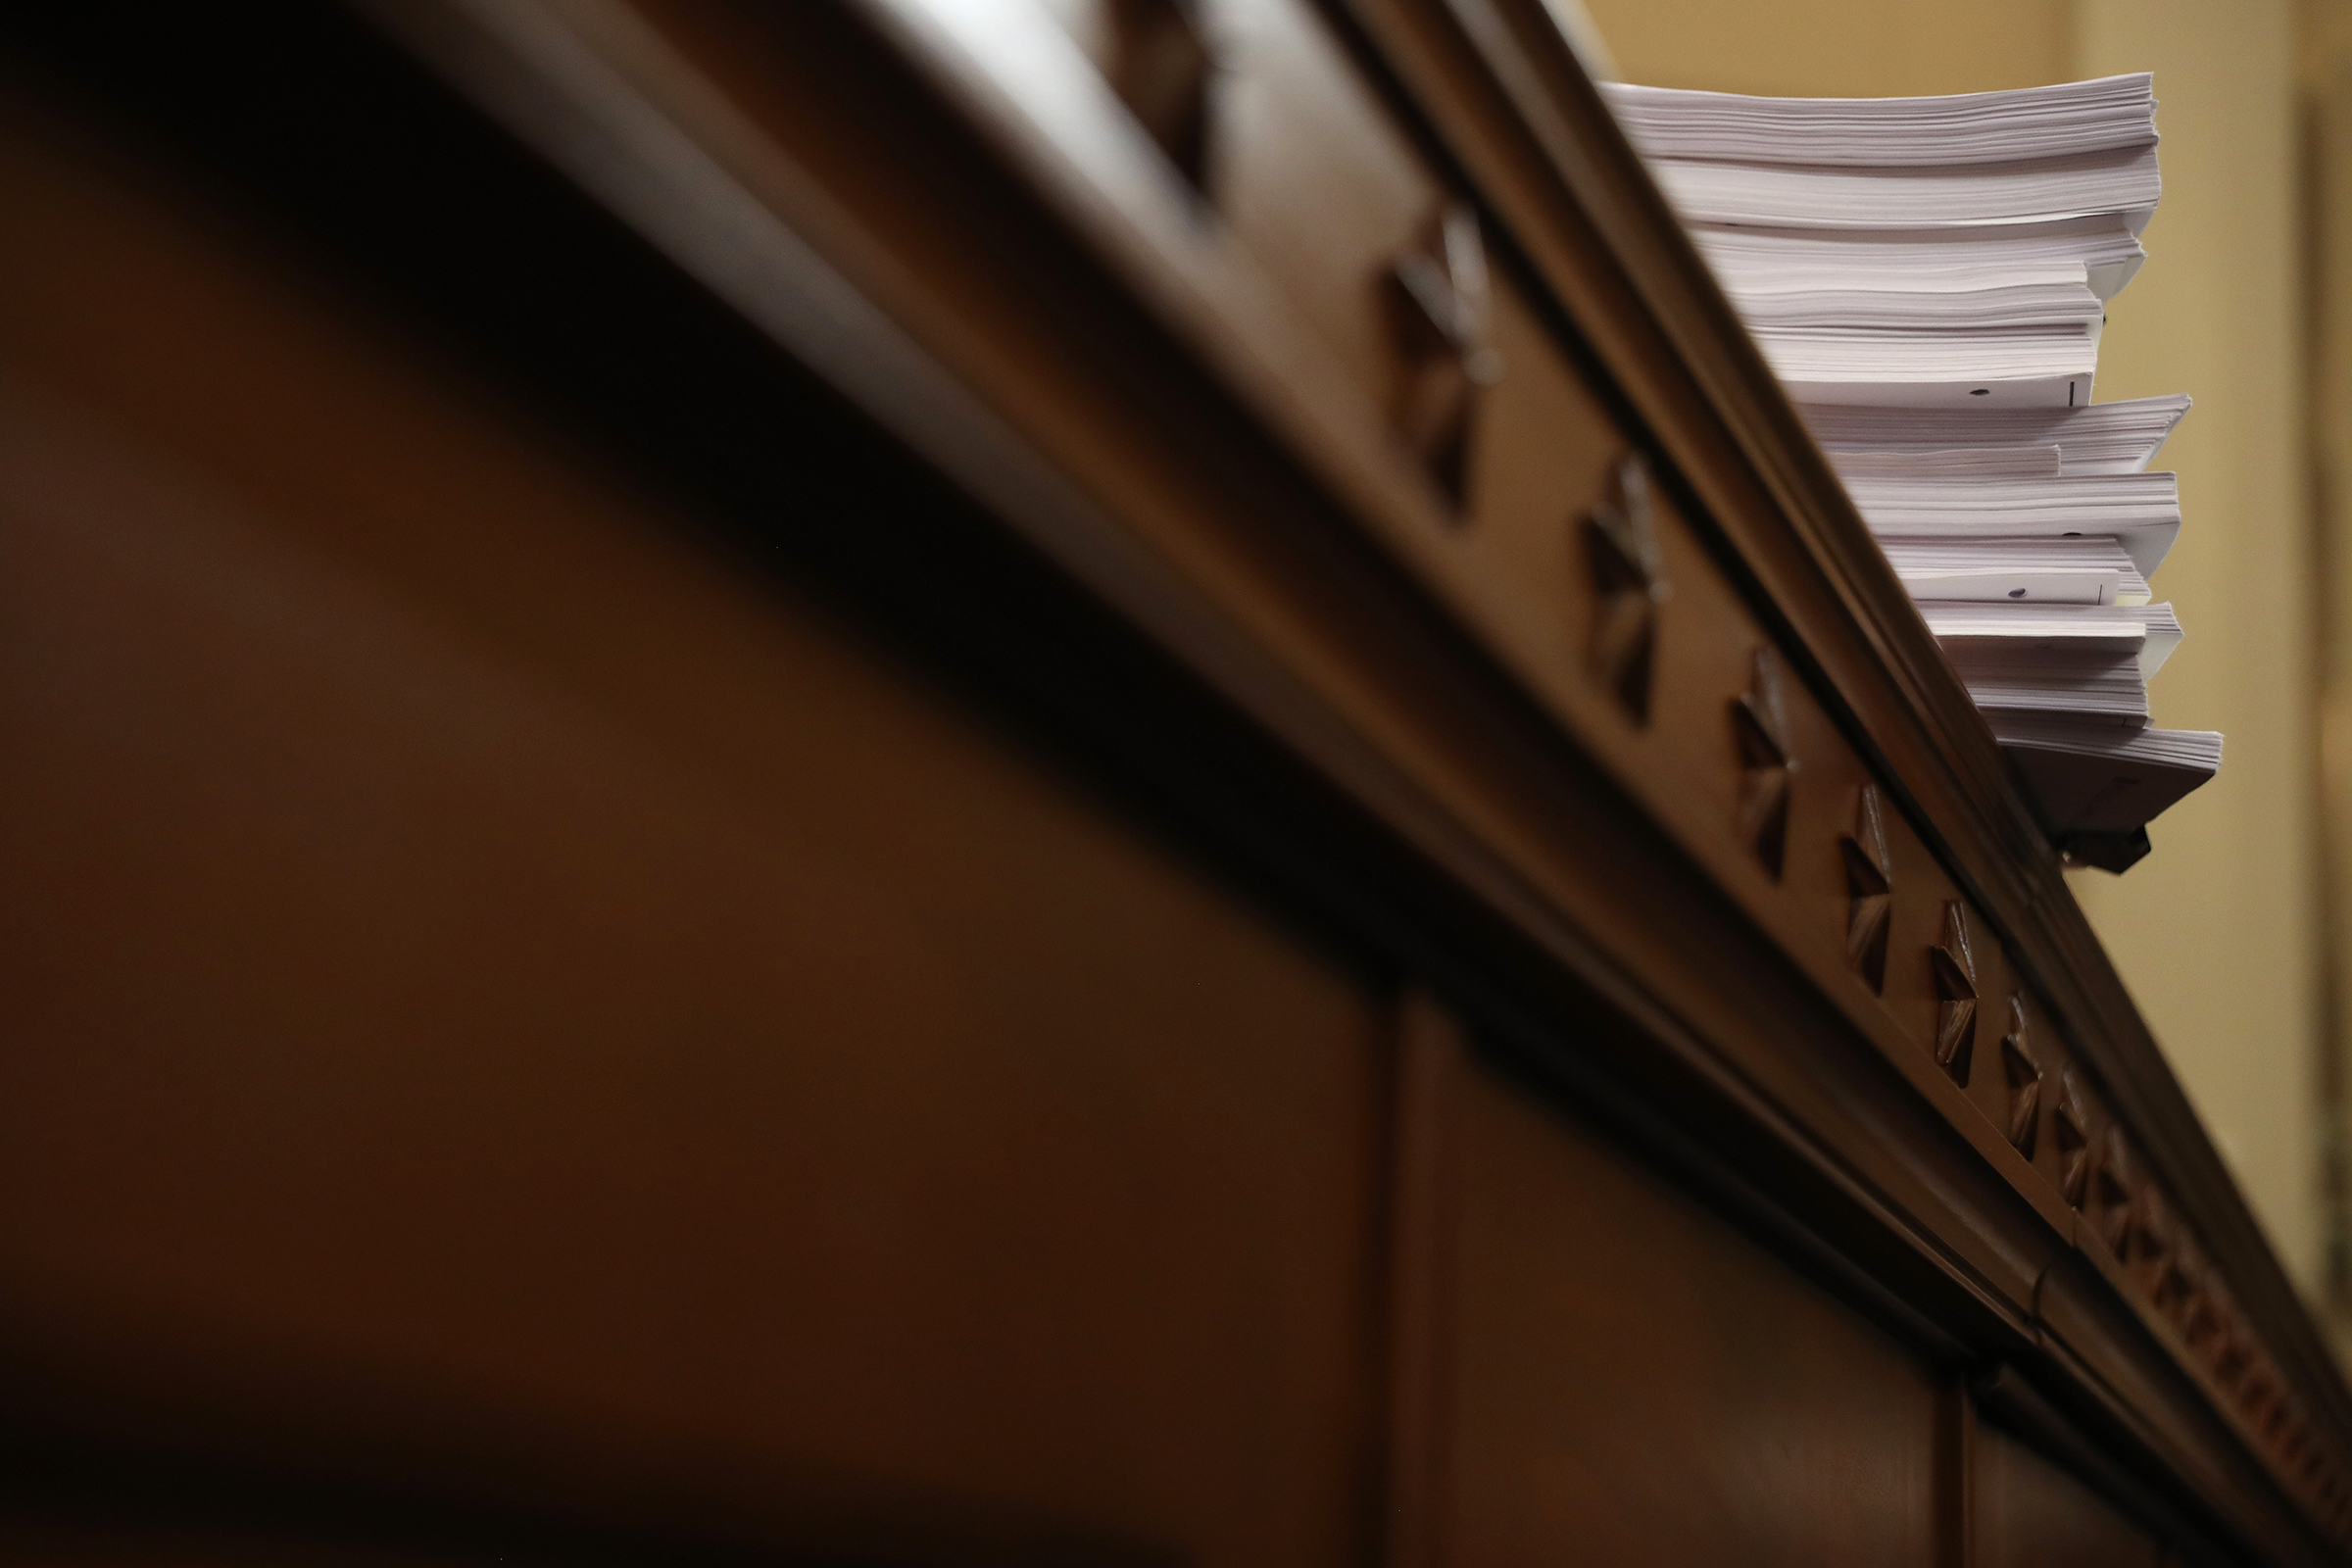 A stack of transcrips of depositions are shown during the third day of open hearings in the impeachment inquiry against President Donald Trump, Nov. 19, 2019. (Chip Somodevilla—Getty Images)